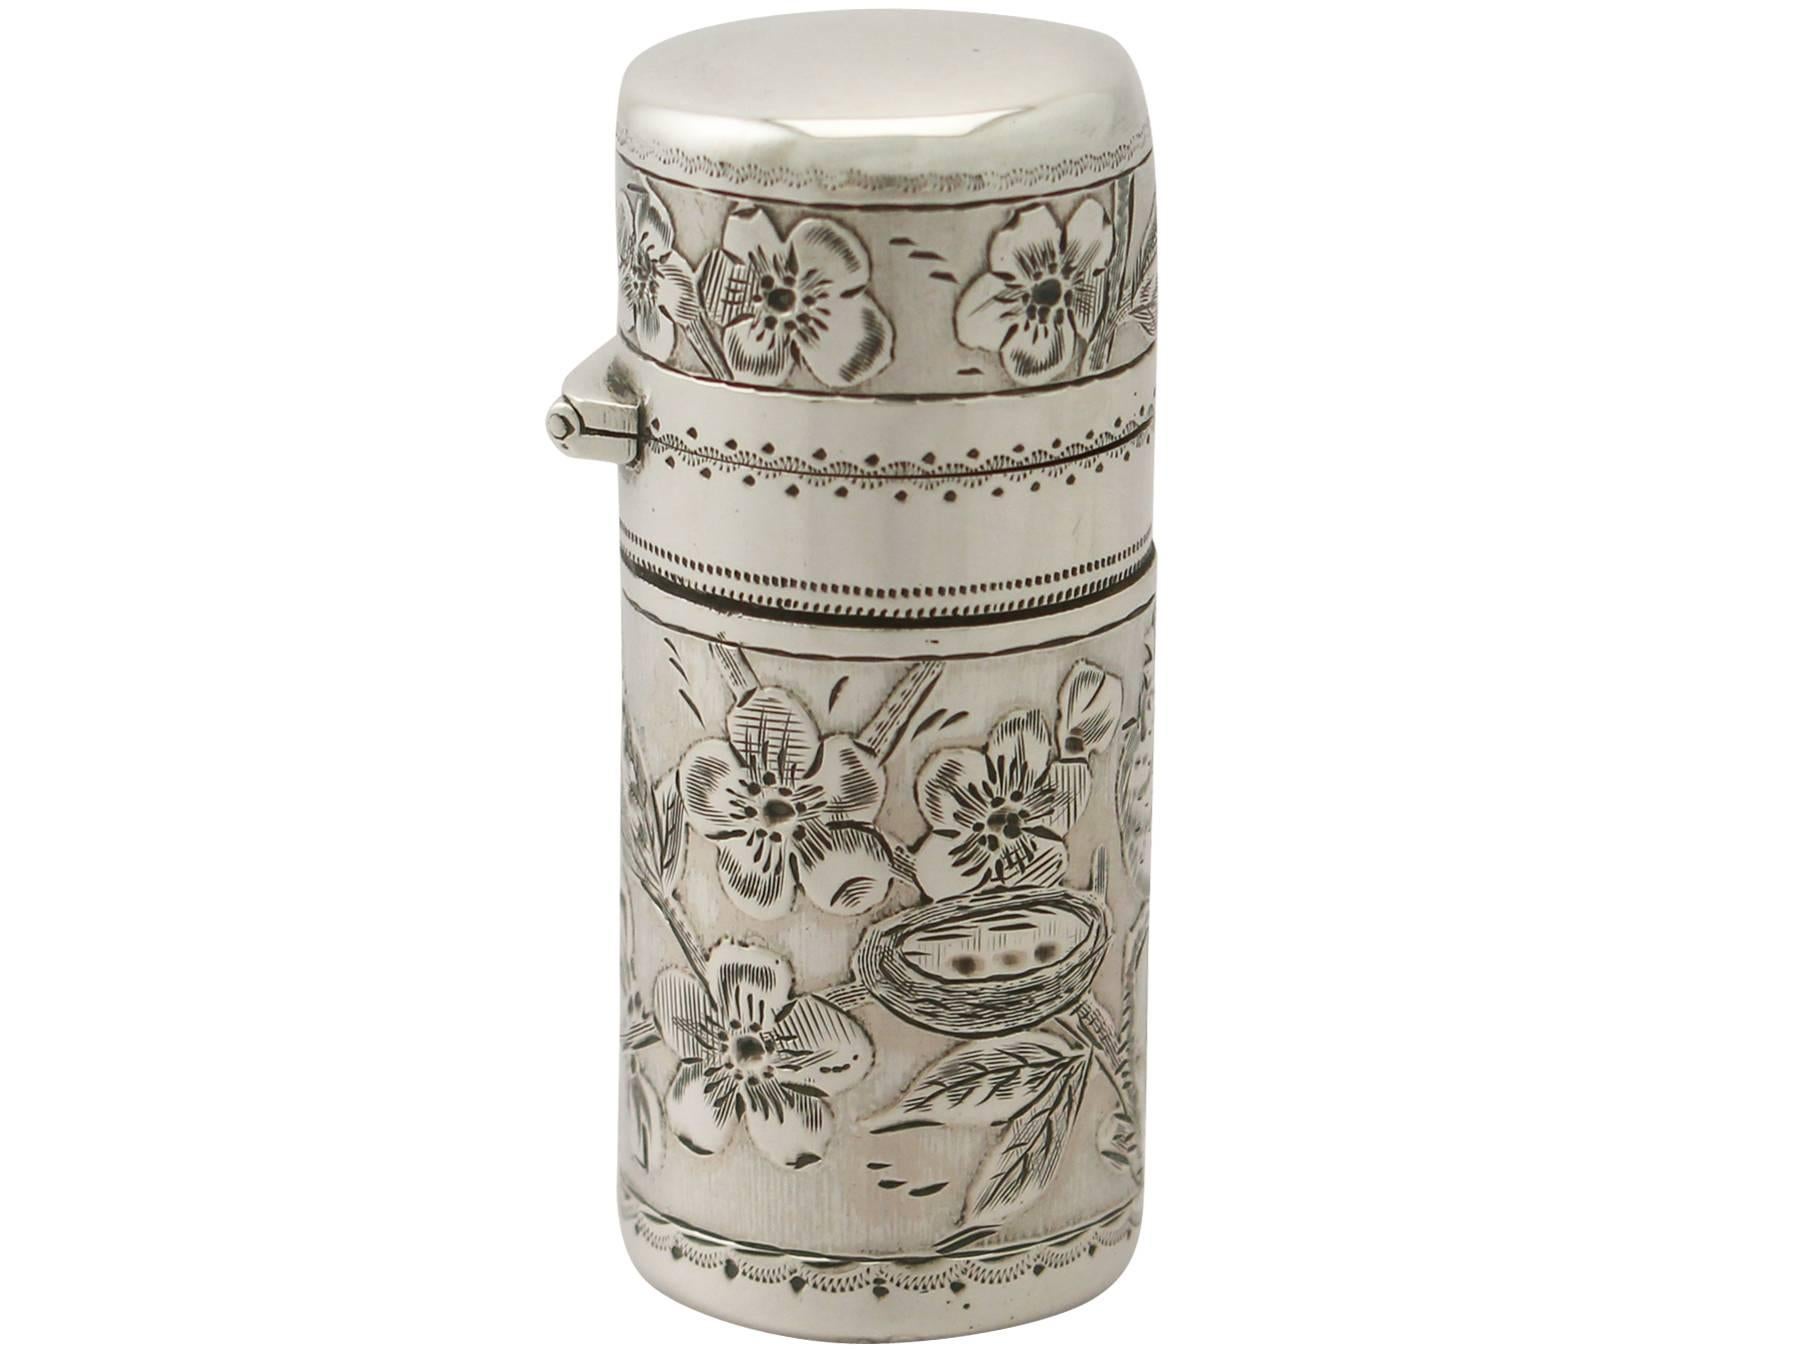 An exceptional, fine and impressive antique Victorian English sterling silver scent flask made by Sampson Mordan & Co; an addition to our ornamental silverware collection.

This exceptional antique Victorian sterling silver scent flask has a